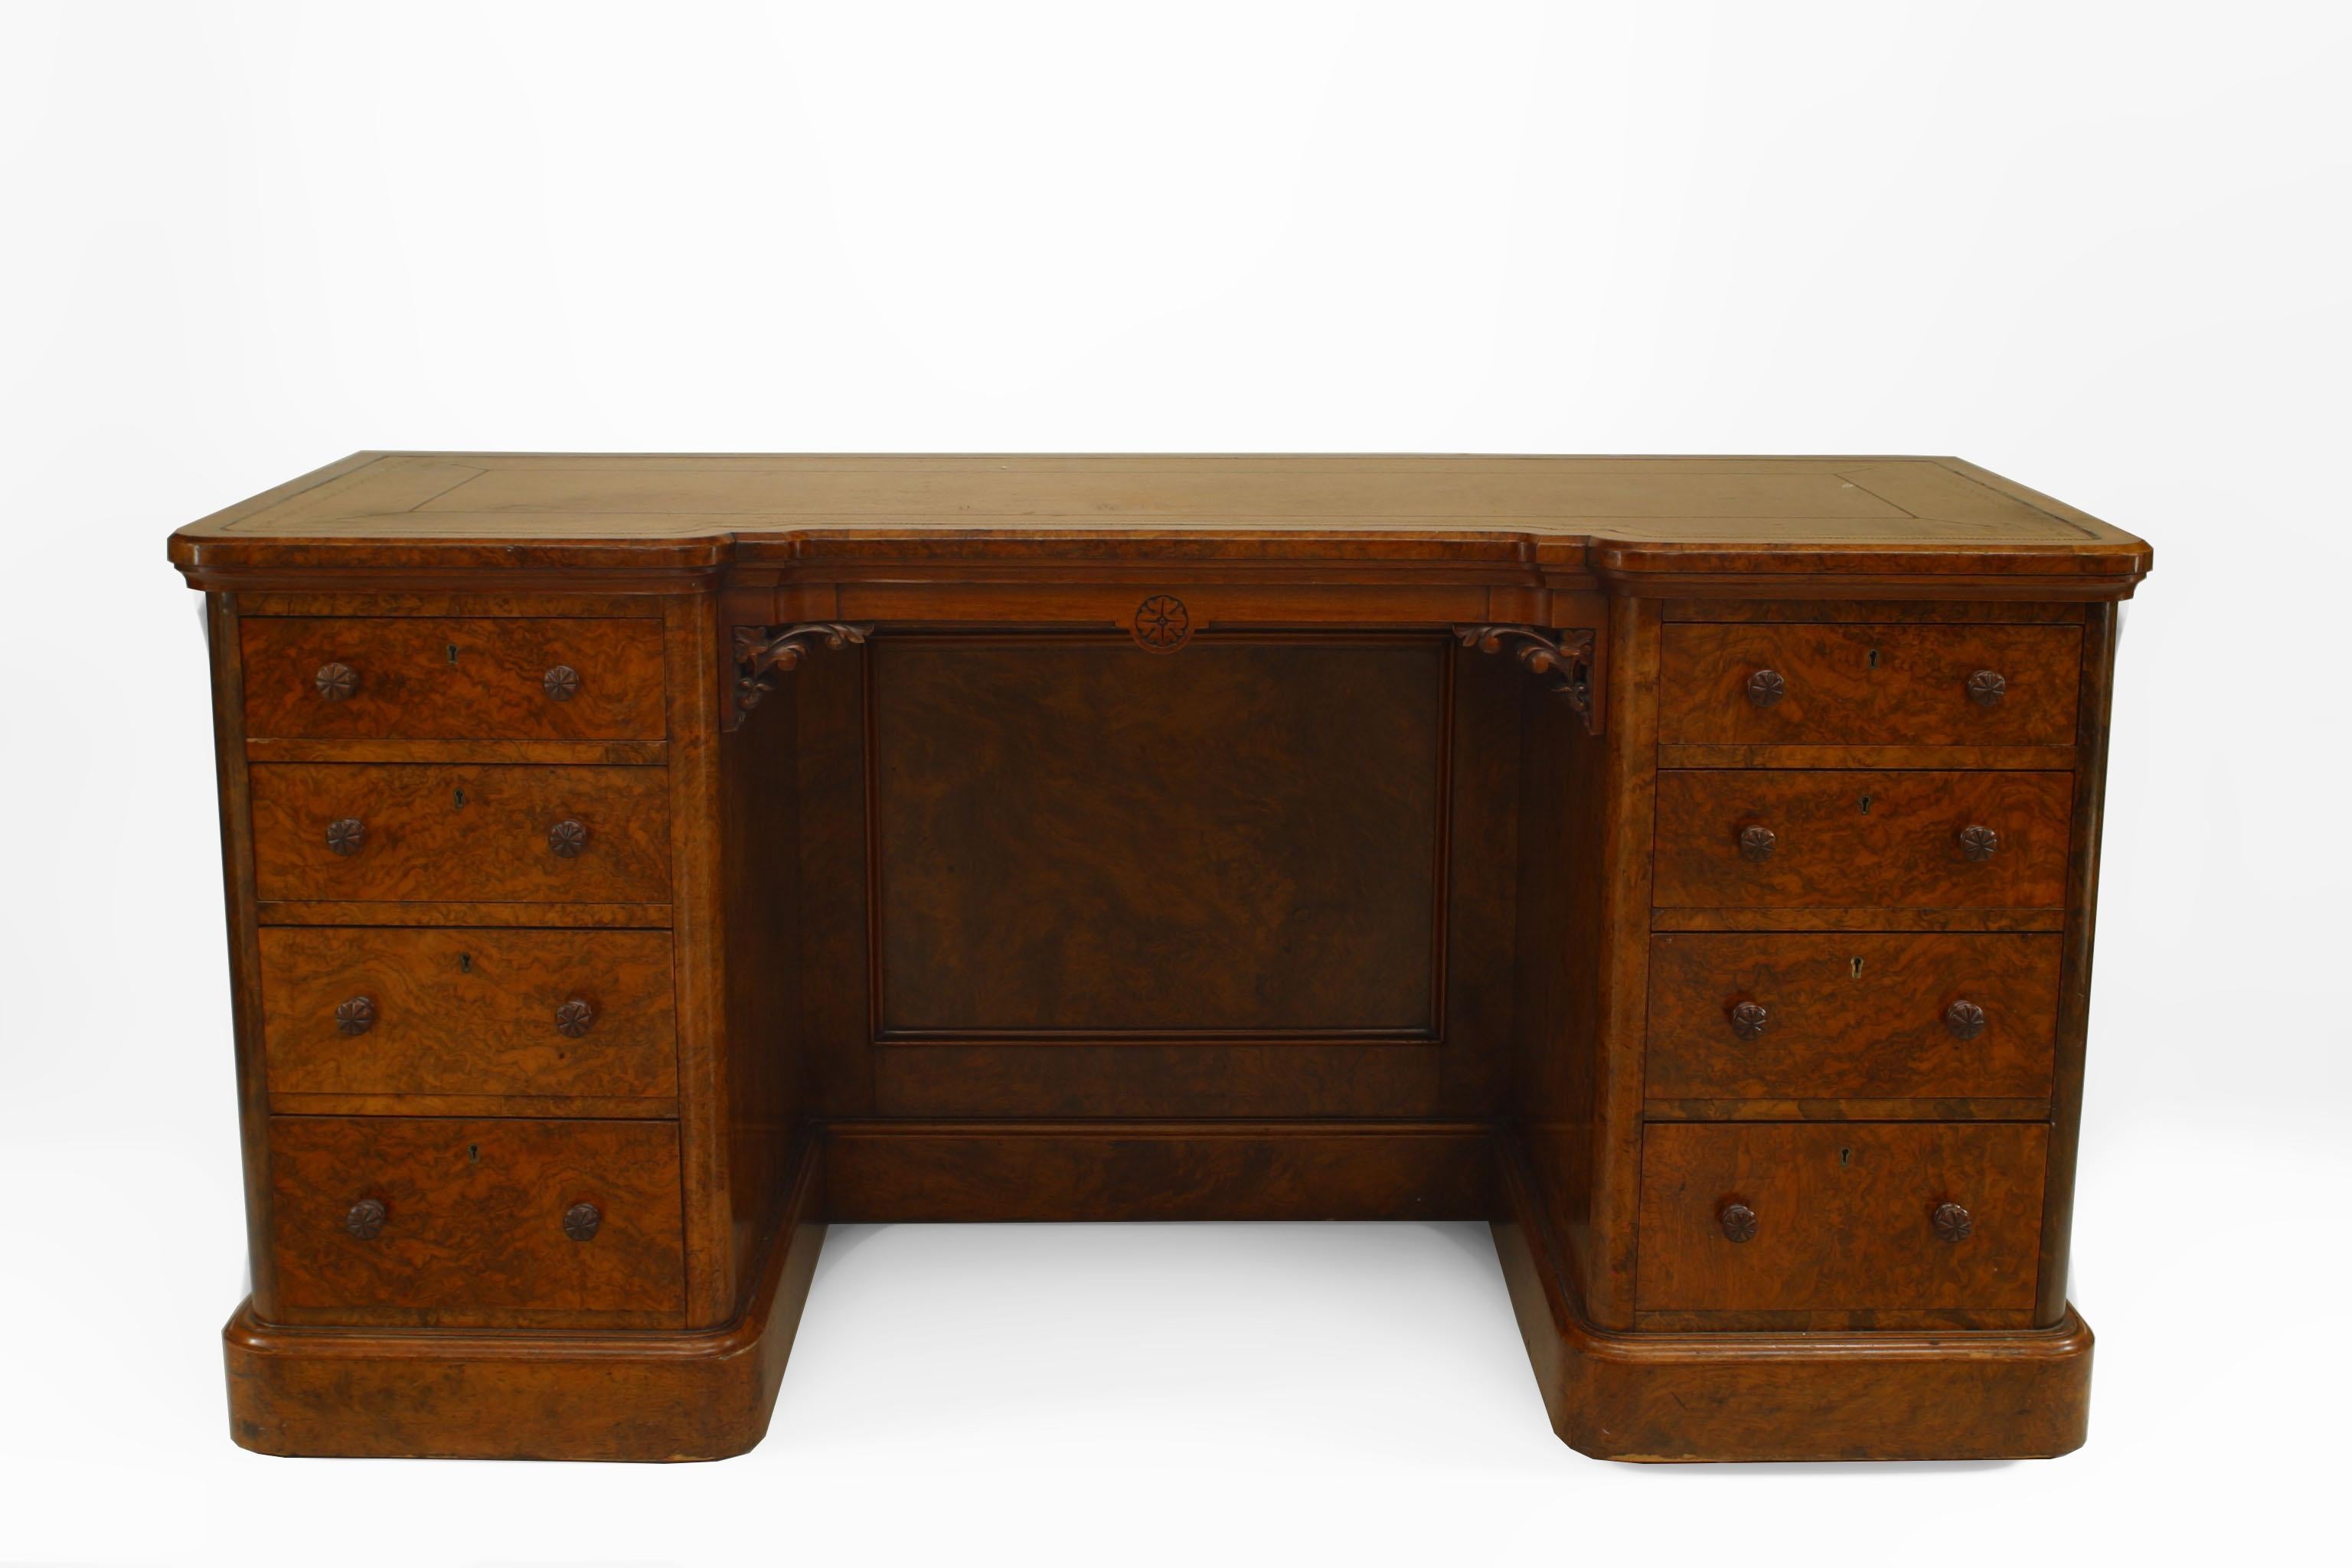 English Victorian burl walnut double pedestal kneehole desk with 8 drawers and a vanity panel center with a brown leather top having a gold tooled border.
